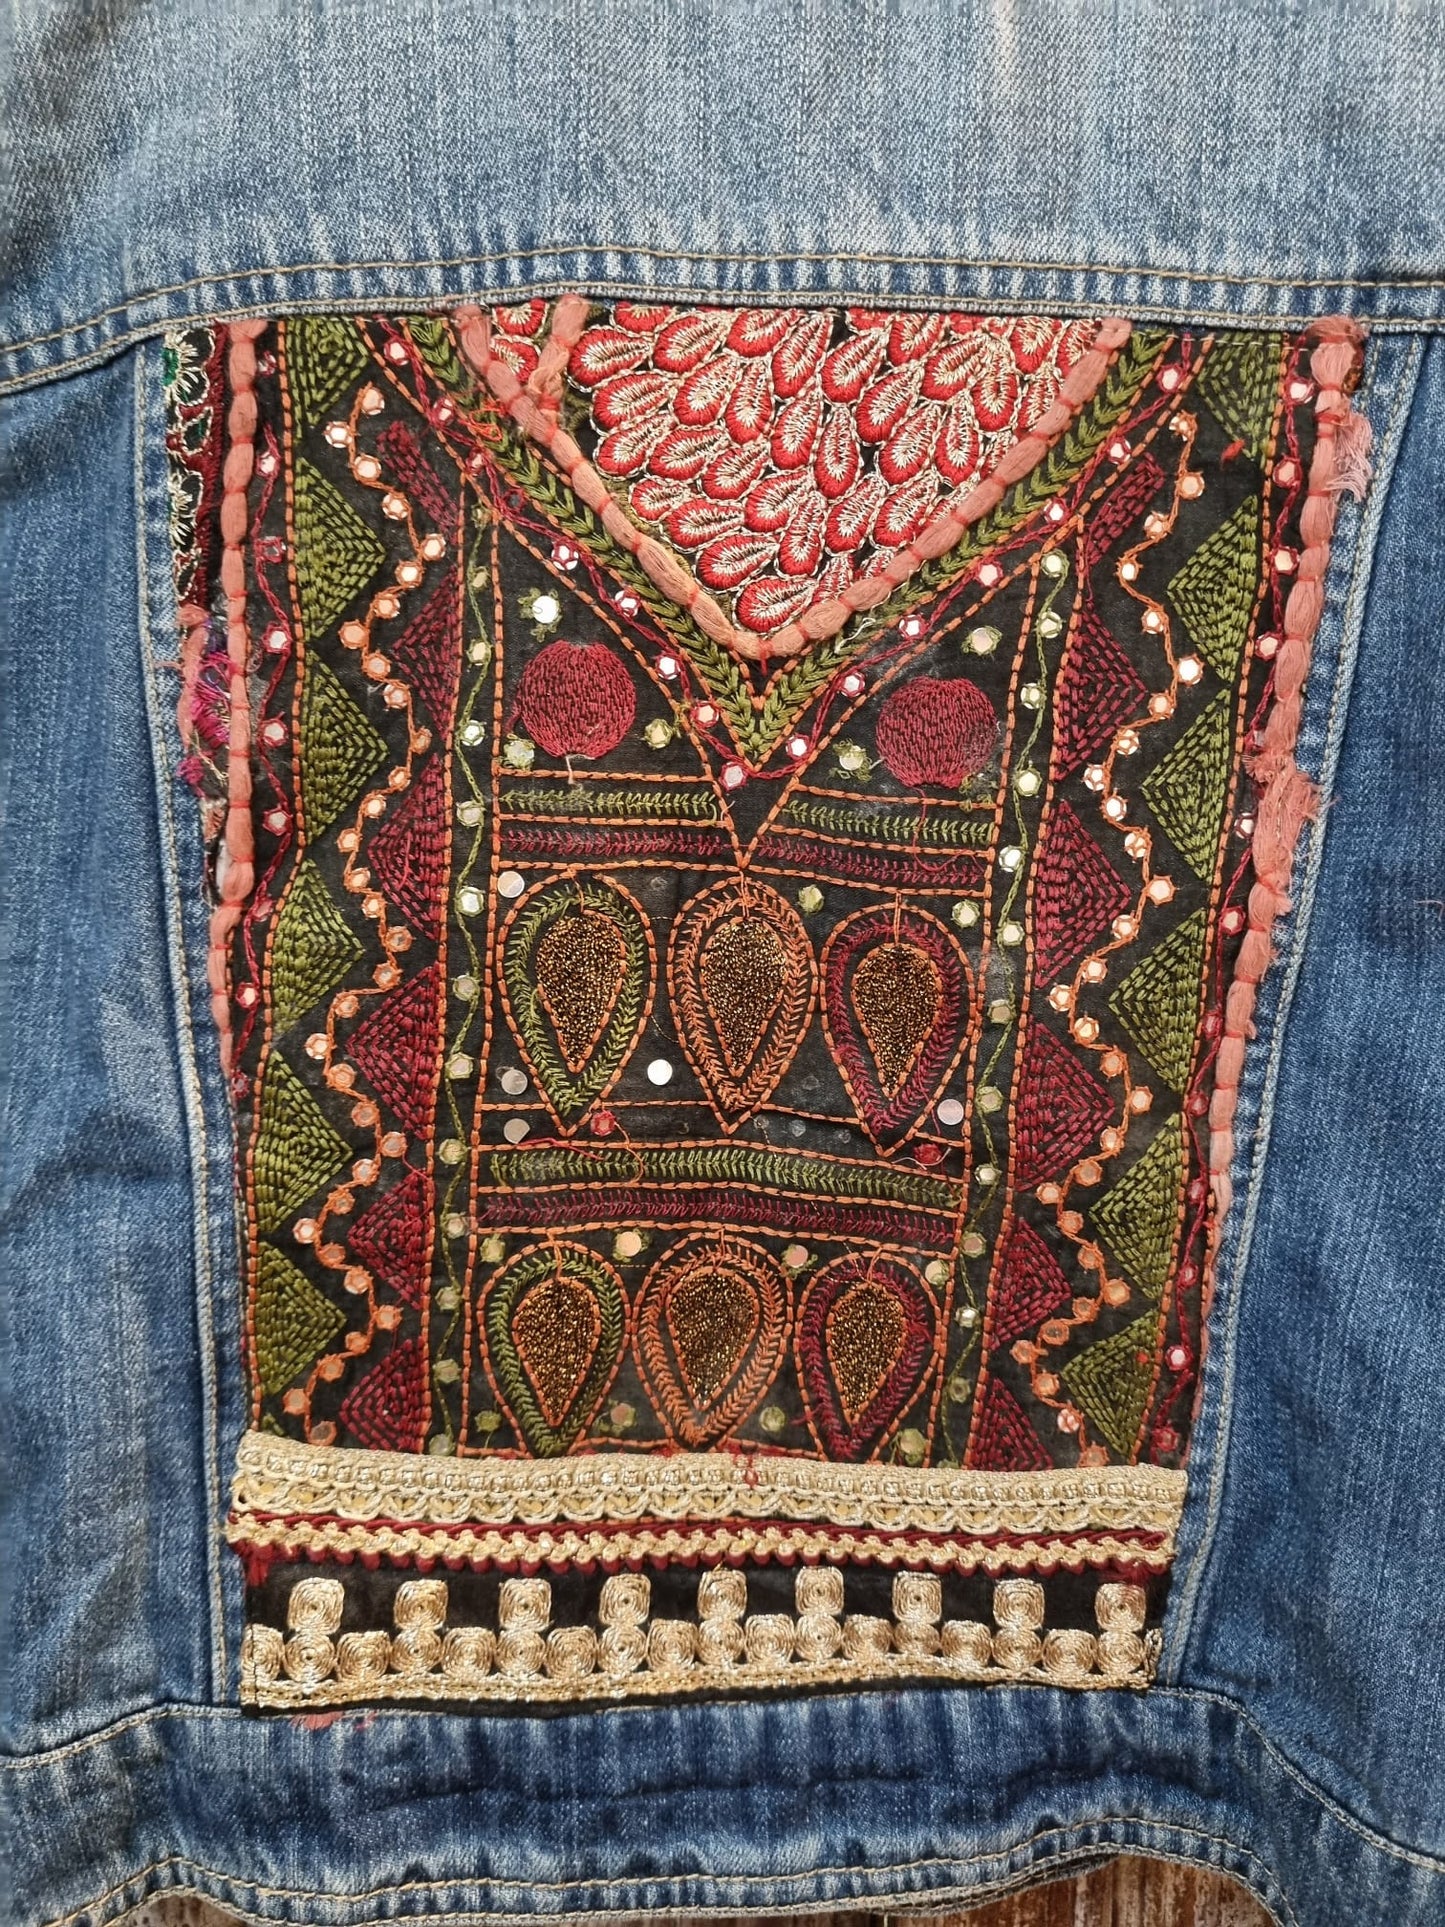 Luxe Denim Jacket  Embroidered and Beading Details